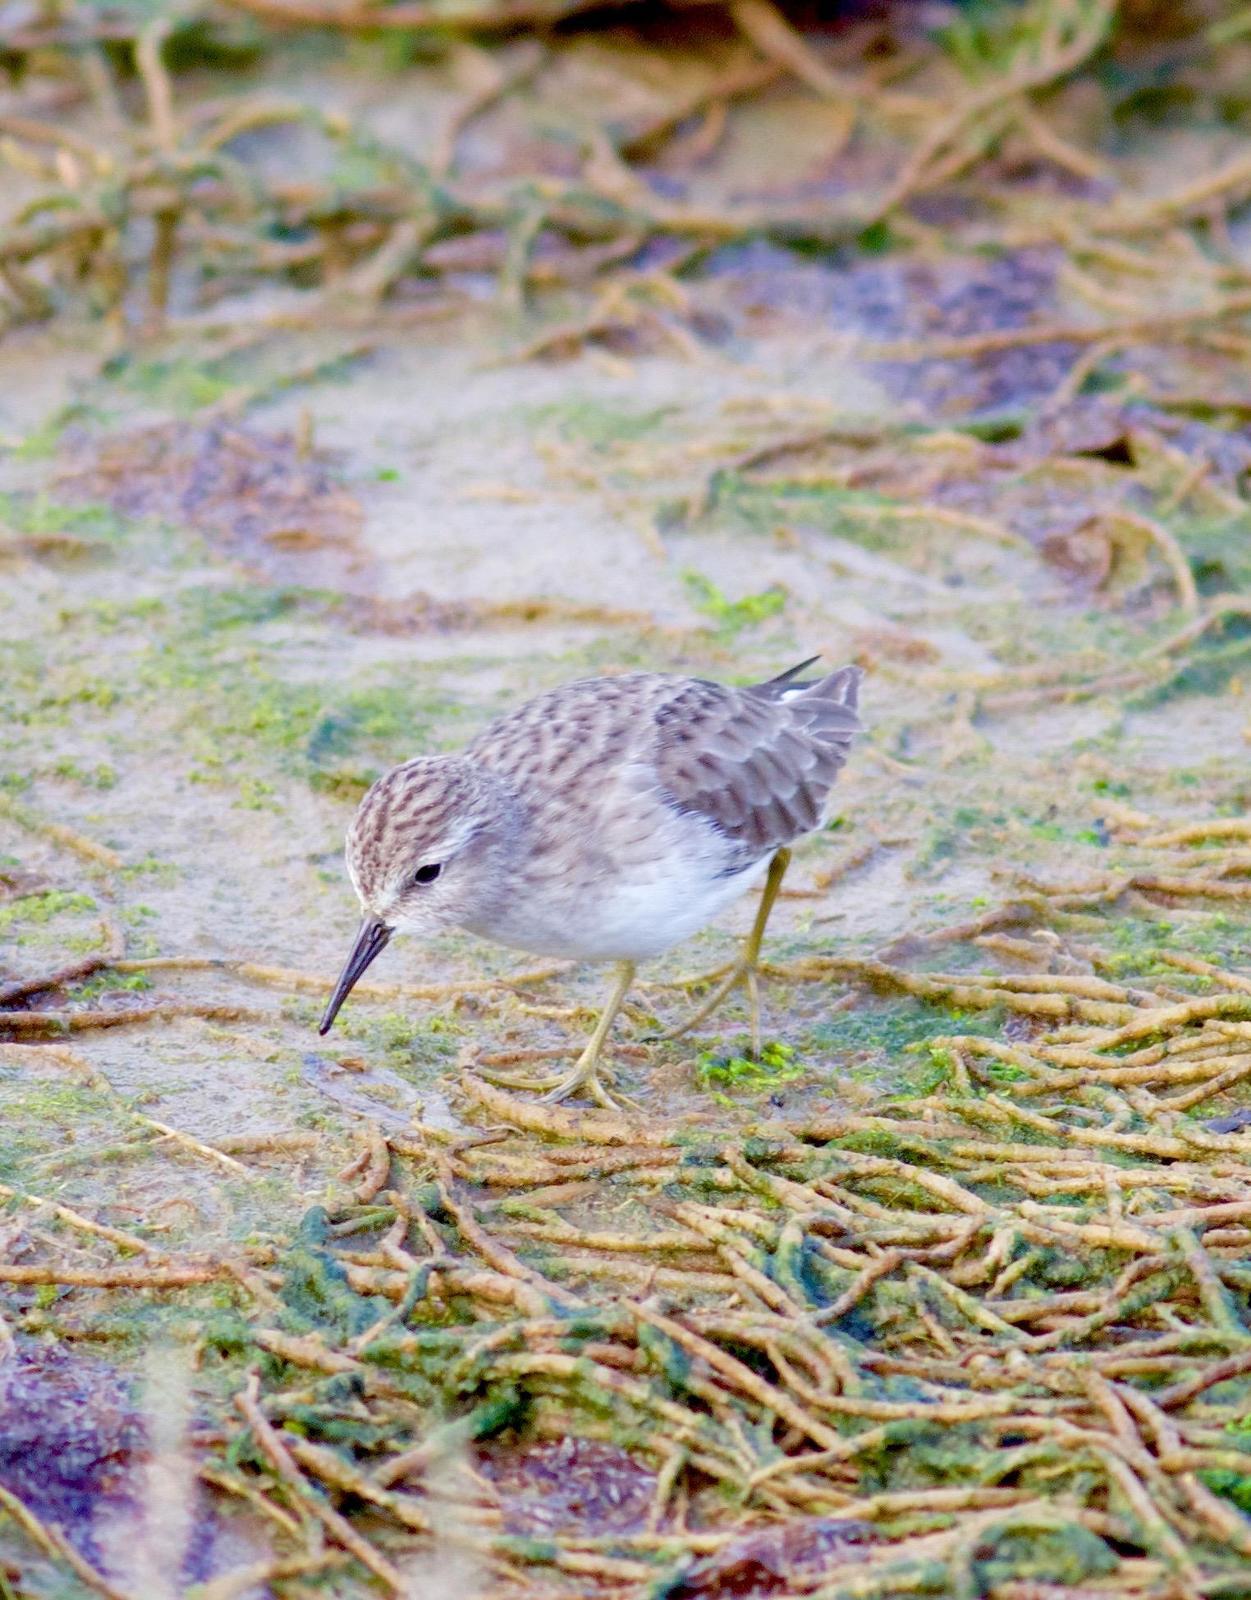 Least Sandpiper Photo by Kathryn Keith